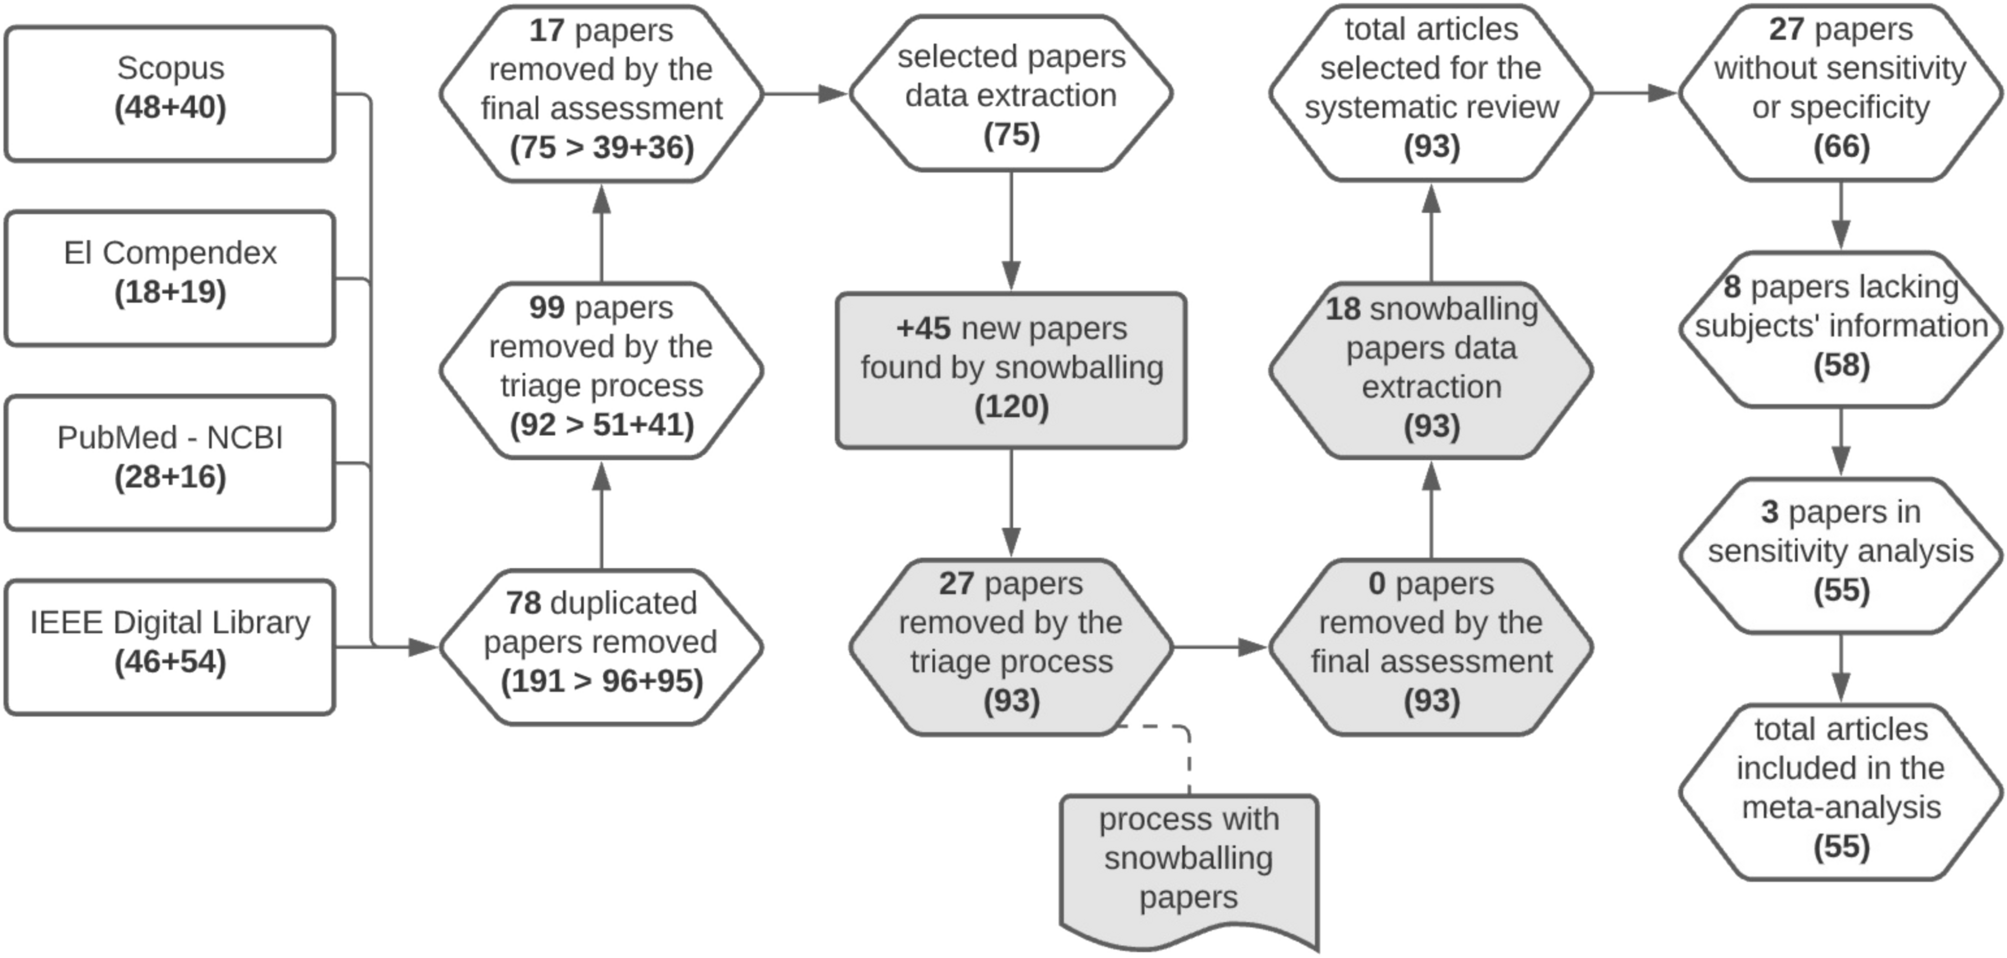 rs-fMRI and machine learning for ASD diagnosis: systematic and meta-analysis | Reports